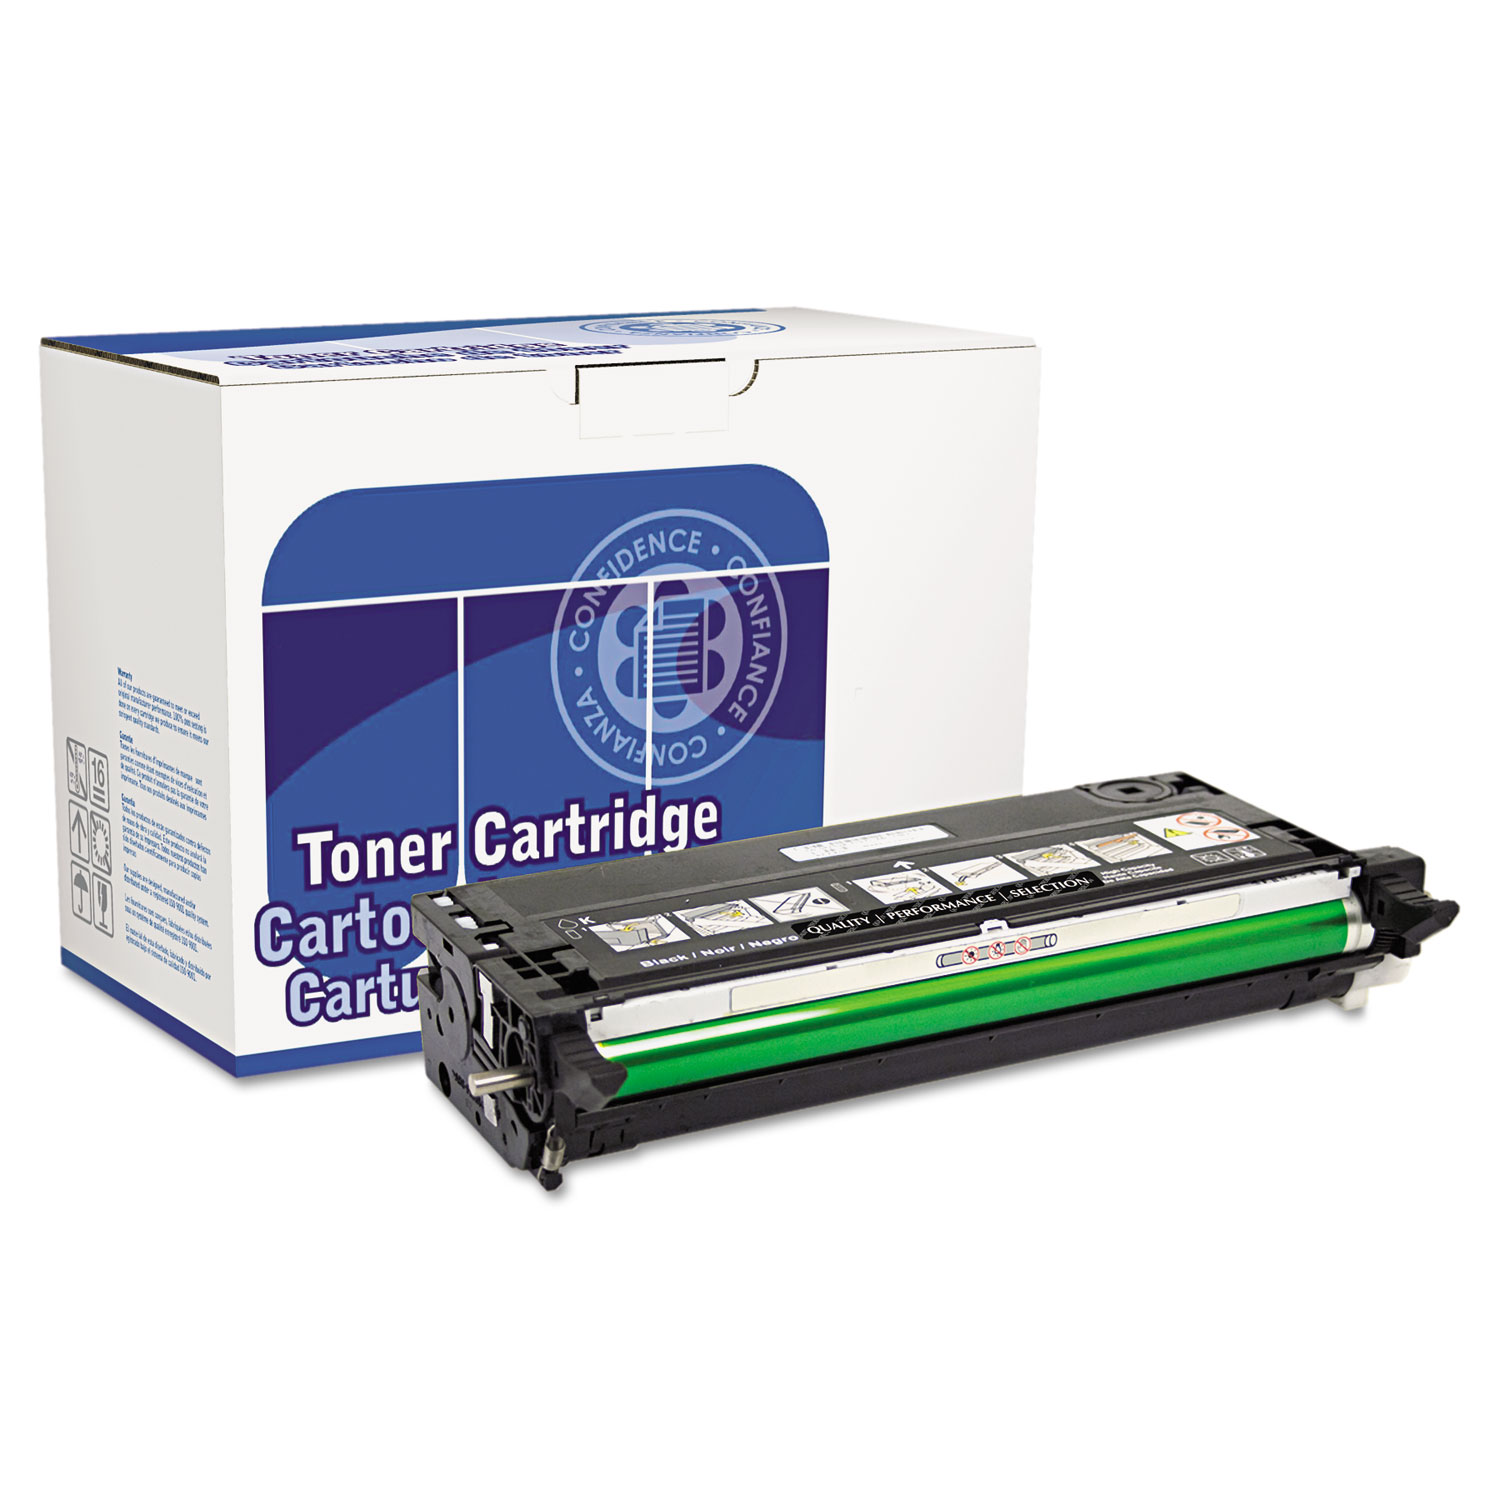 Remanufactured 310-8395 (3115B) High-Yield Toner, 8,000 Page-Yield, Black